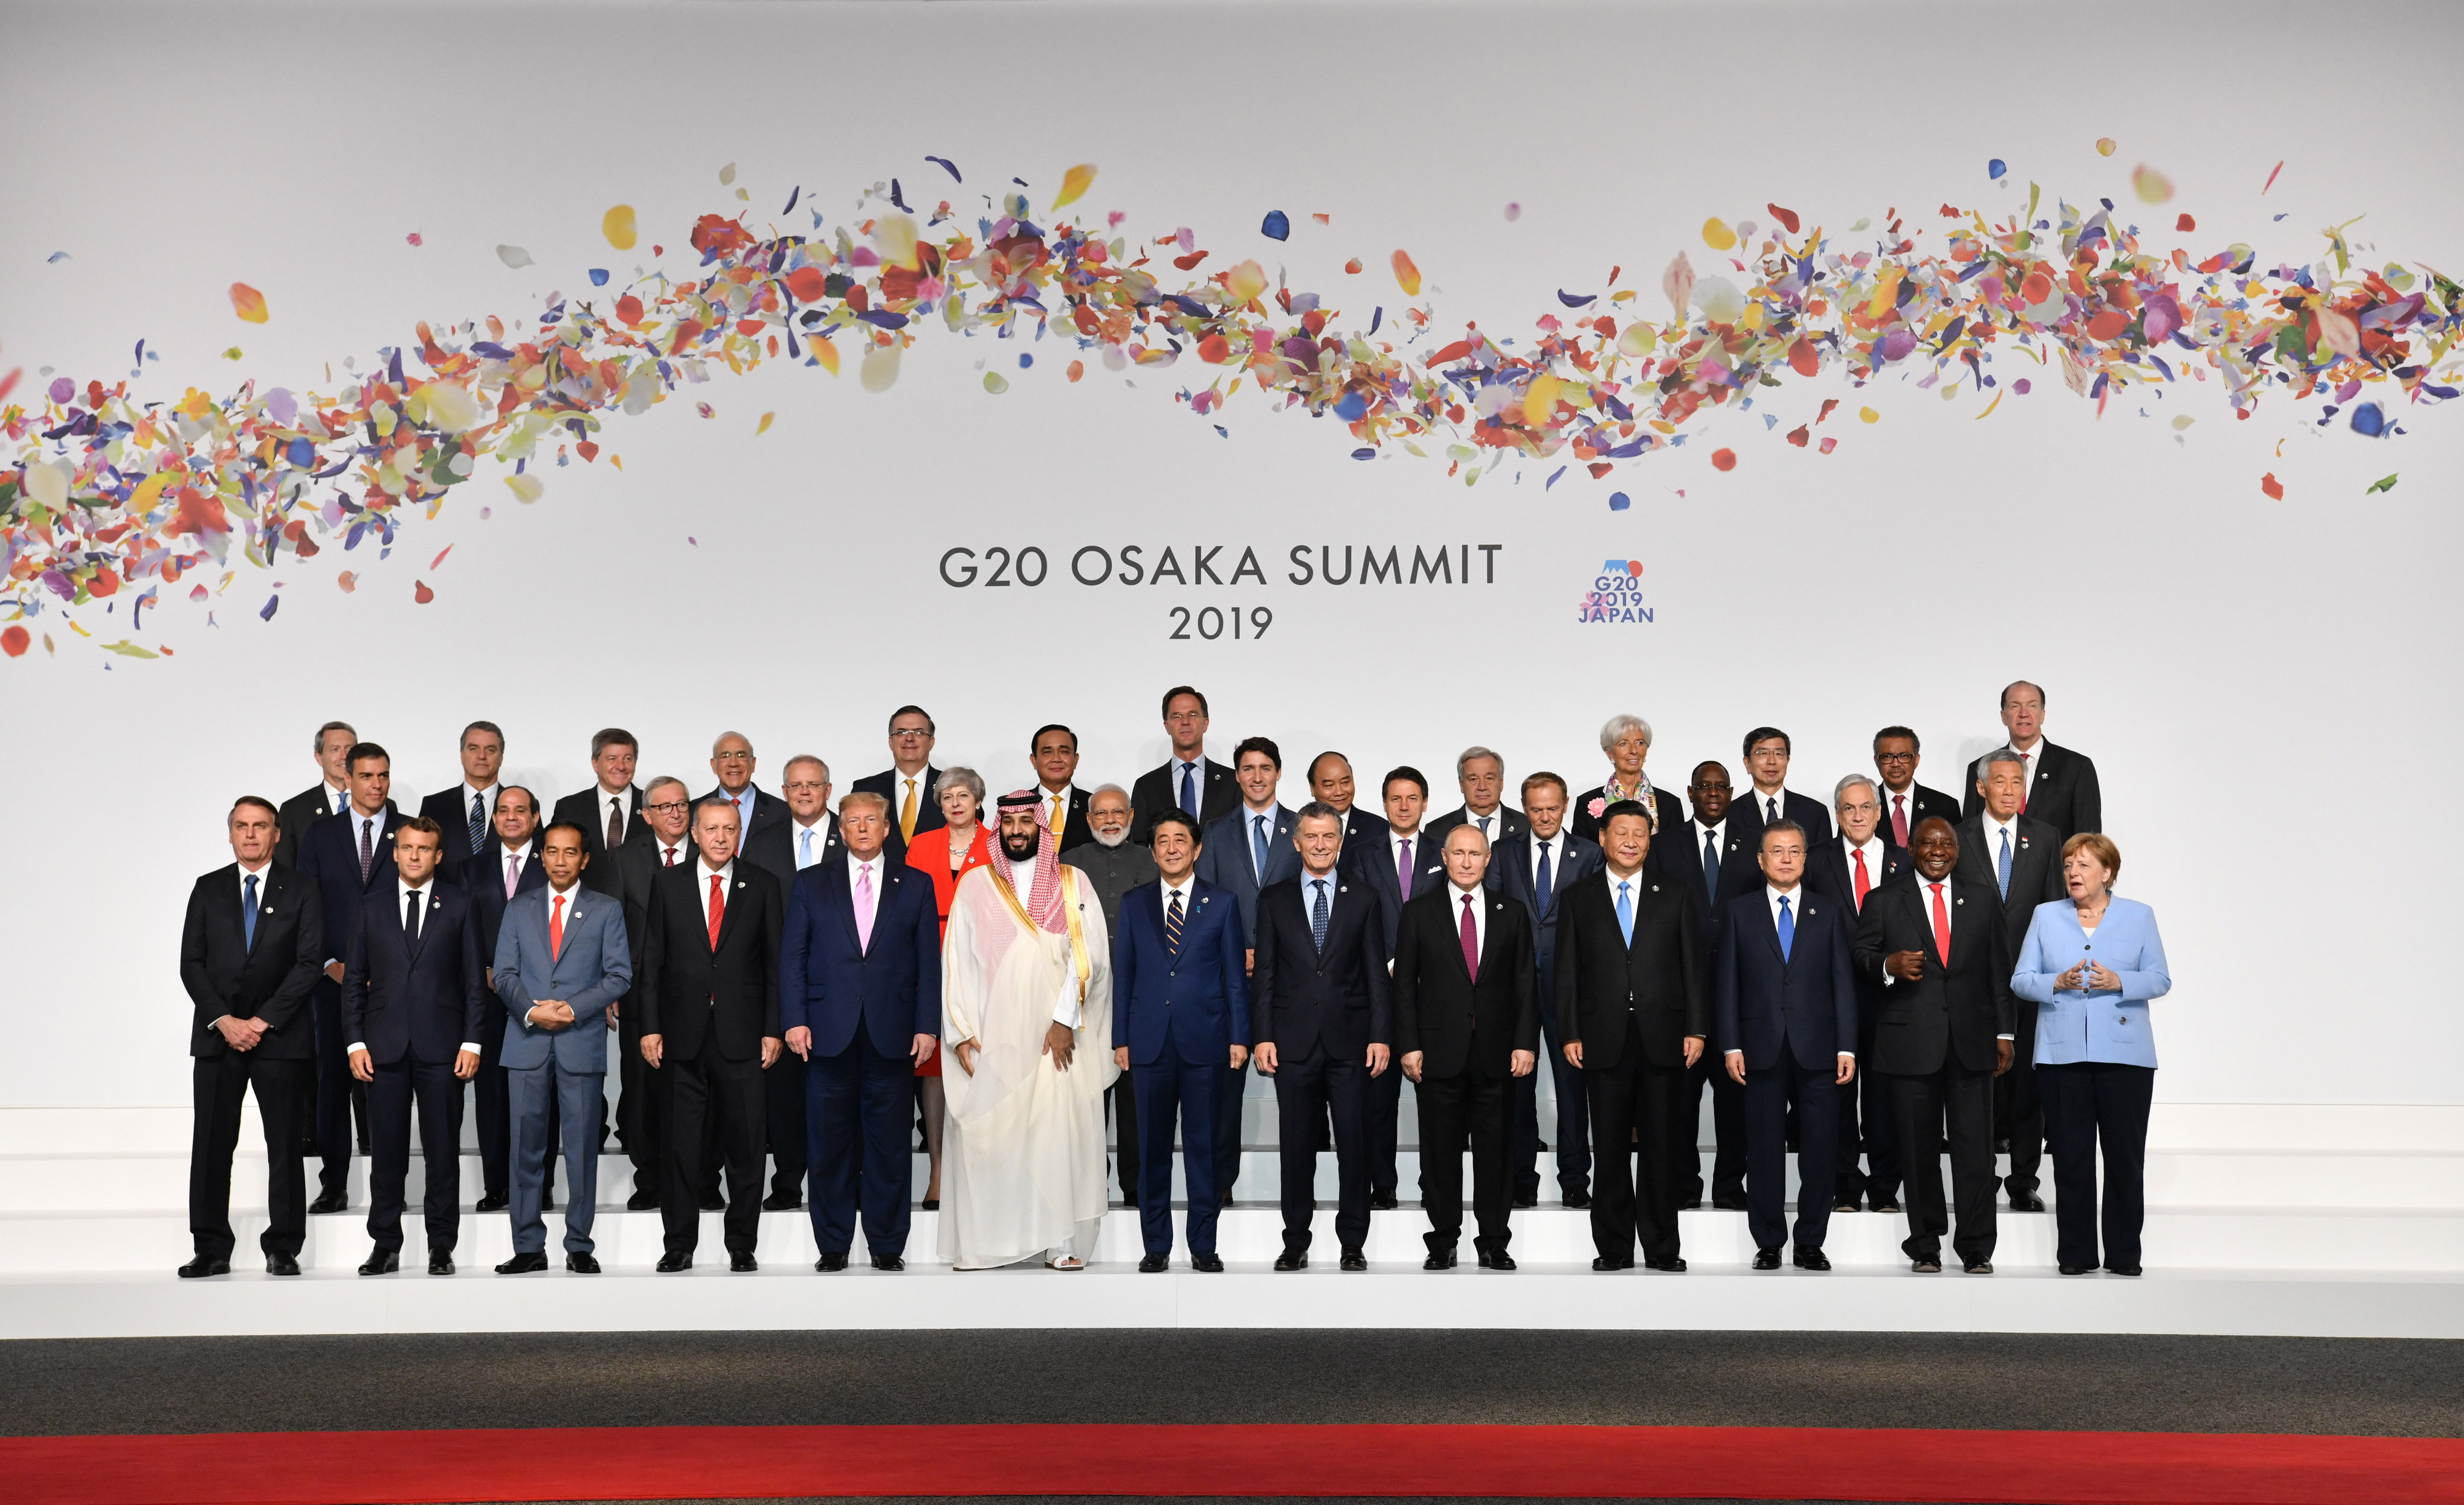 Japan Welcomes World Leaders To Its First Ever G20 Summit In Osaka